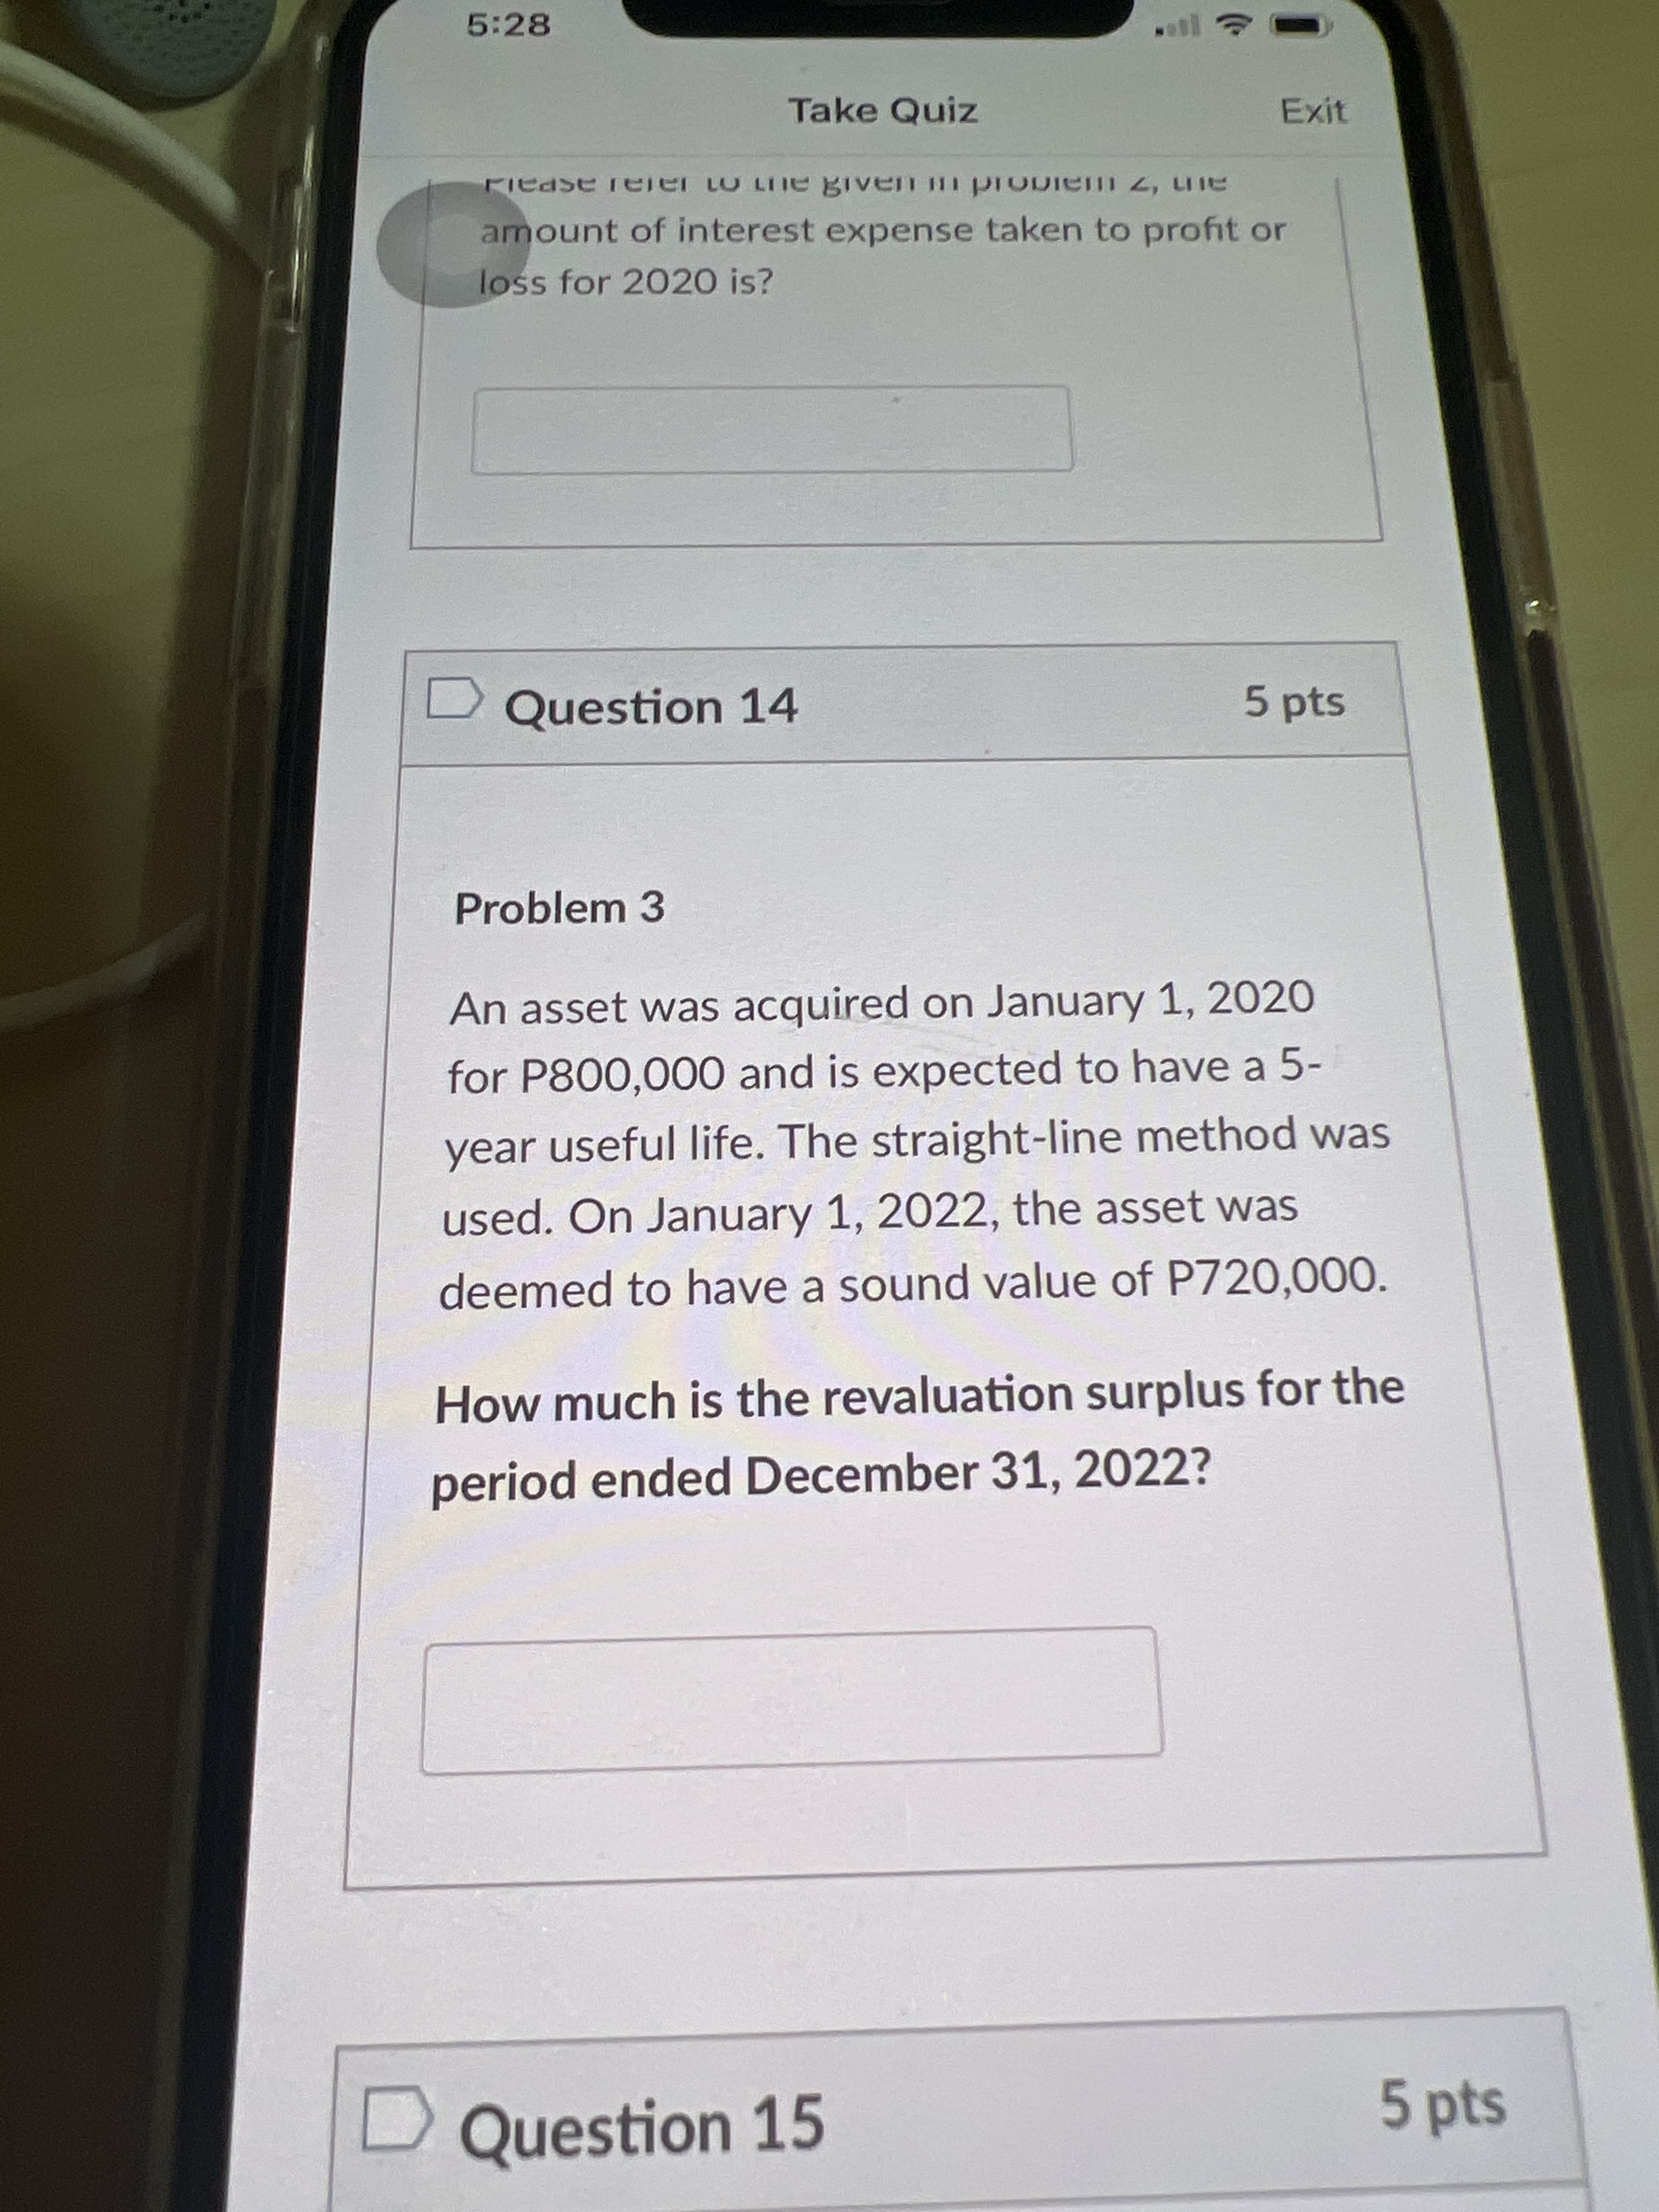 5:28
Take Quiz
Exit
amount of interest expense taken to profit or
loss for 2020 is?
Question 14
5pts
Problem 3
An asset was acquired on January 1, 2020
for P800,000 and is expected to have a 5-
year useful life. The straight-line method was
used. On January 1, 2022, the asset was
deemed to have a sound value of P720,000.
How much is the revaluation surplus for the
period ended December 31, 2022?
Question 15
5 pts
